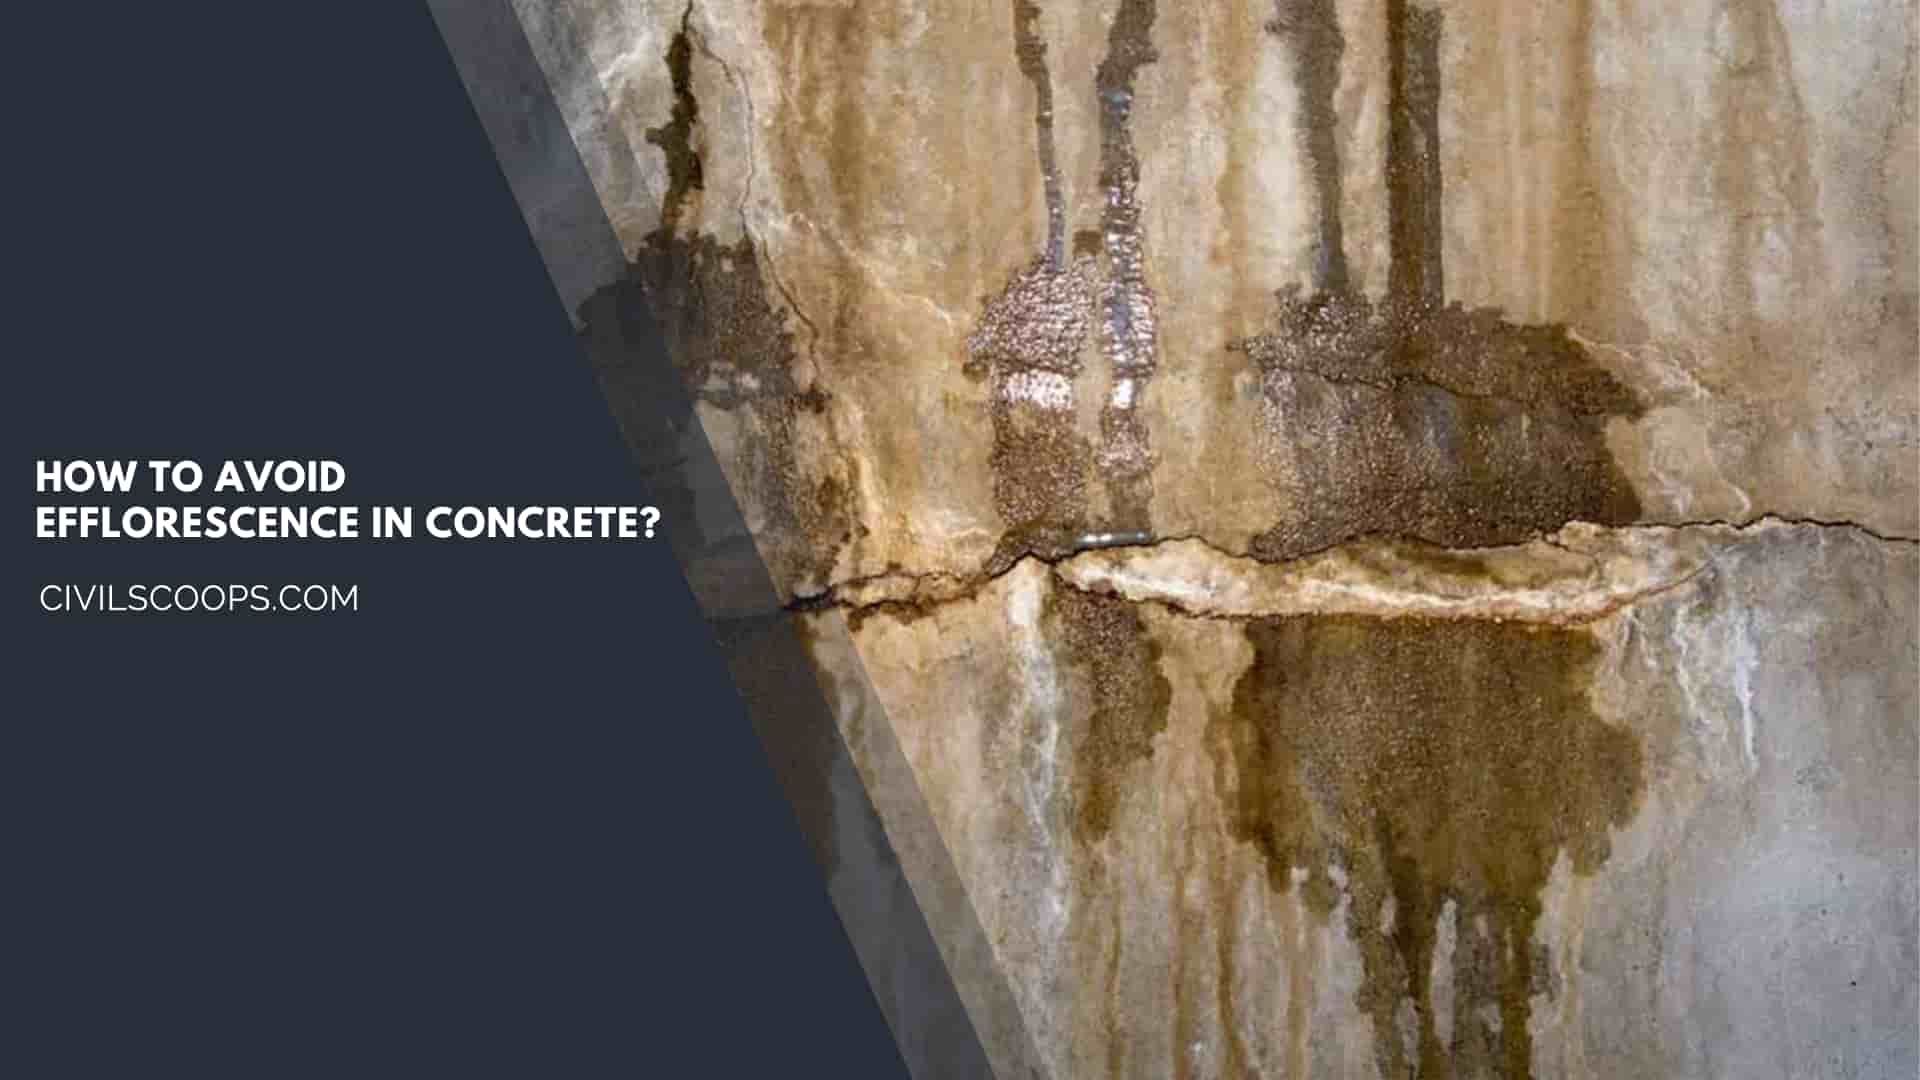 How to Avoid Efflorescence in Concrete